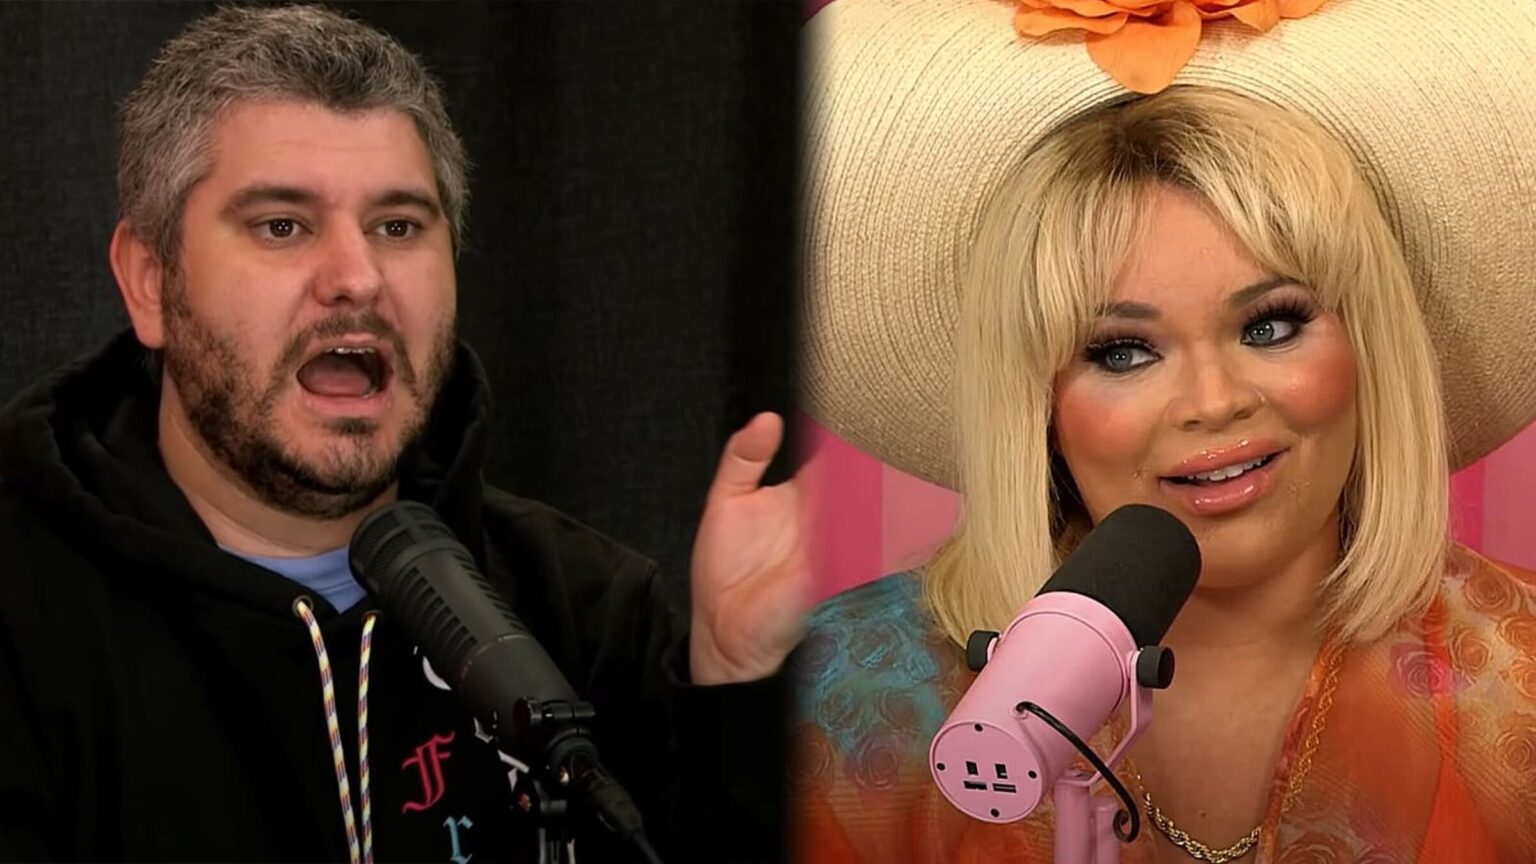 Drama is the only word that describes what’s going on with Trisha Paytas and Ethan from h3h3Productions. Here's what's happening now.